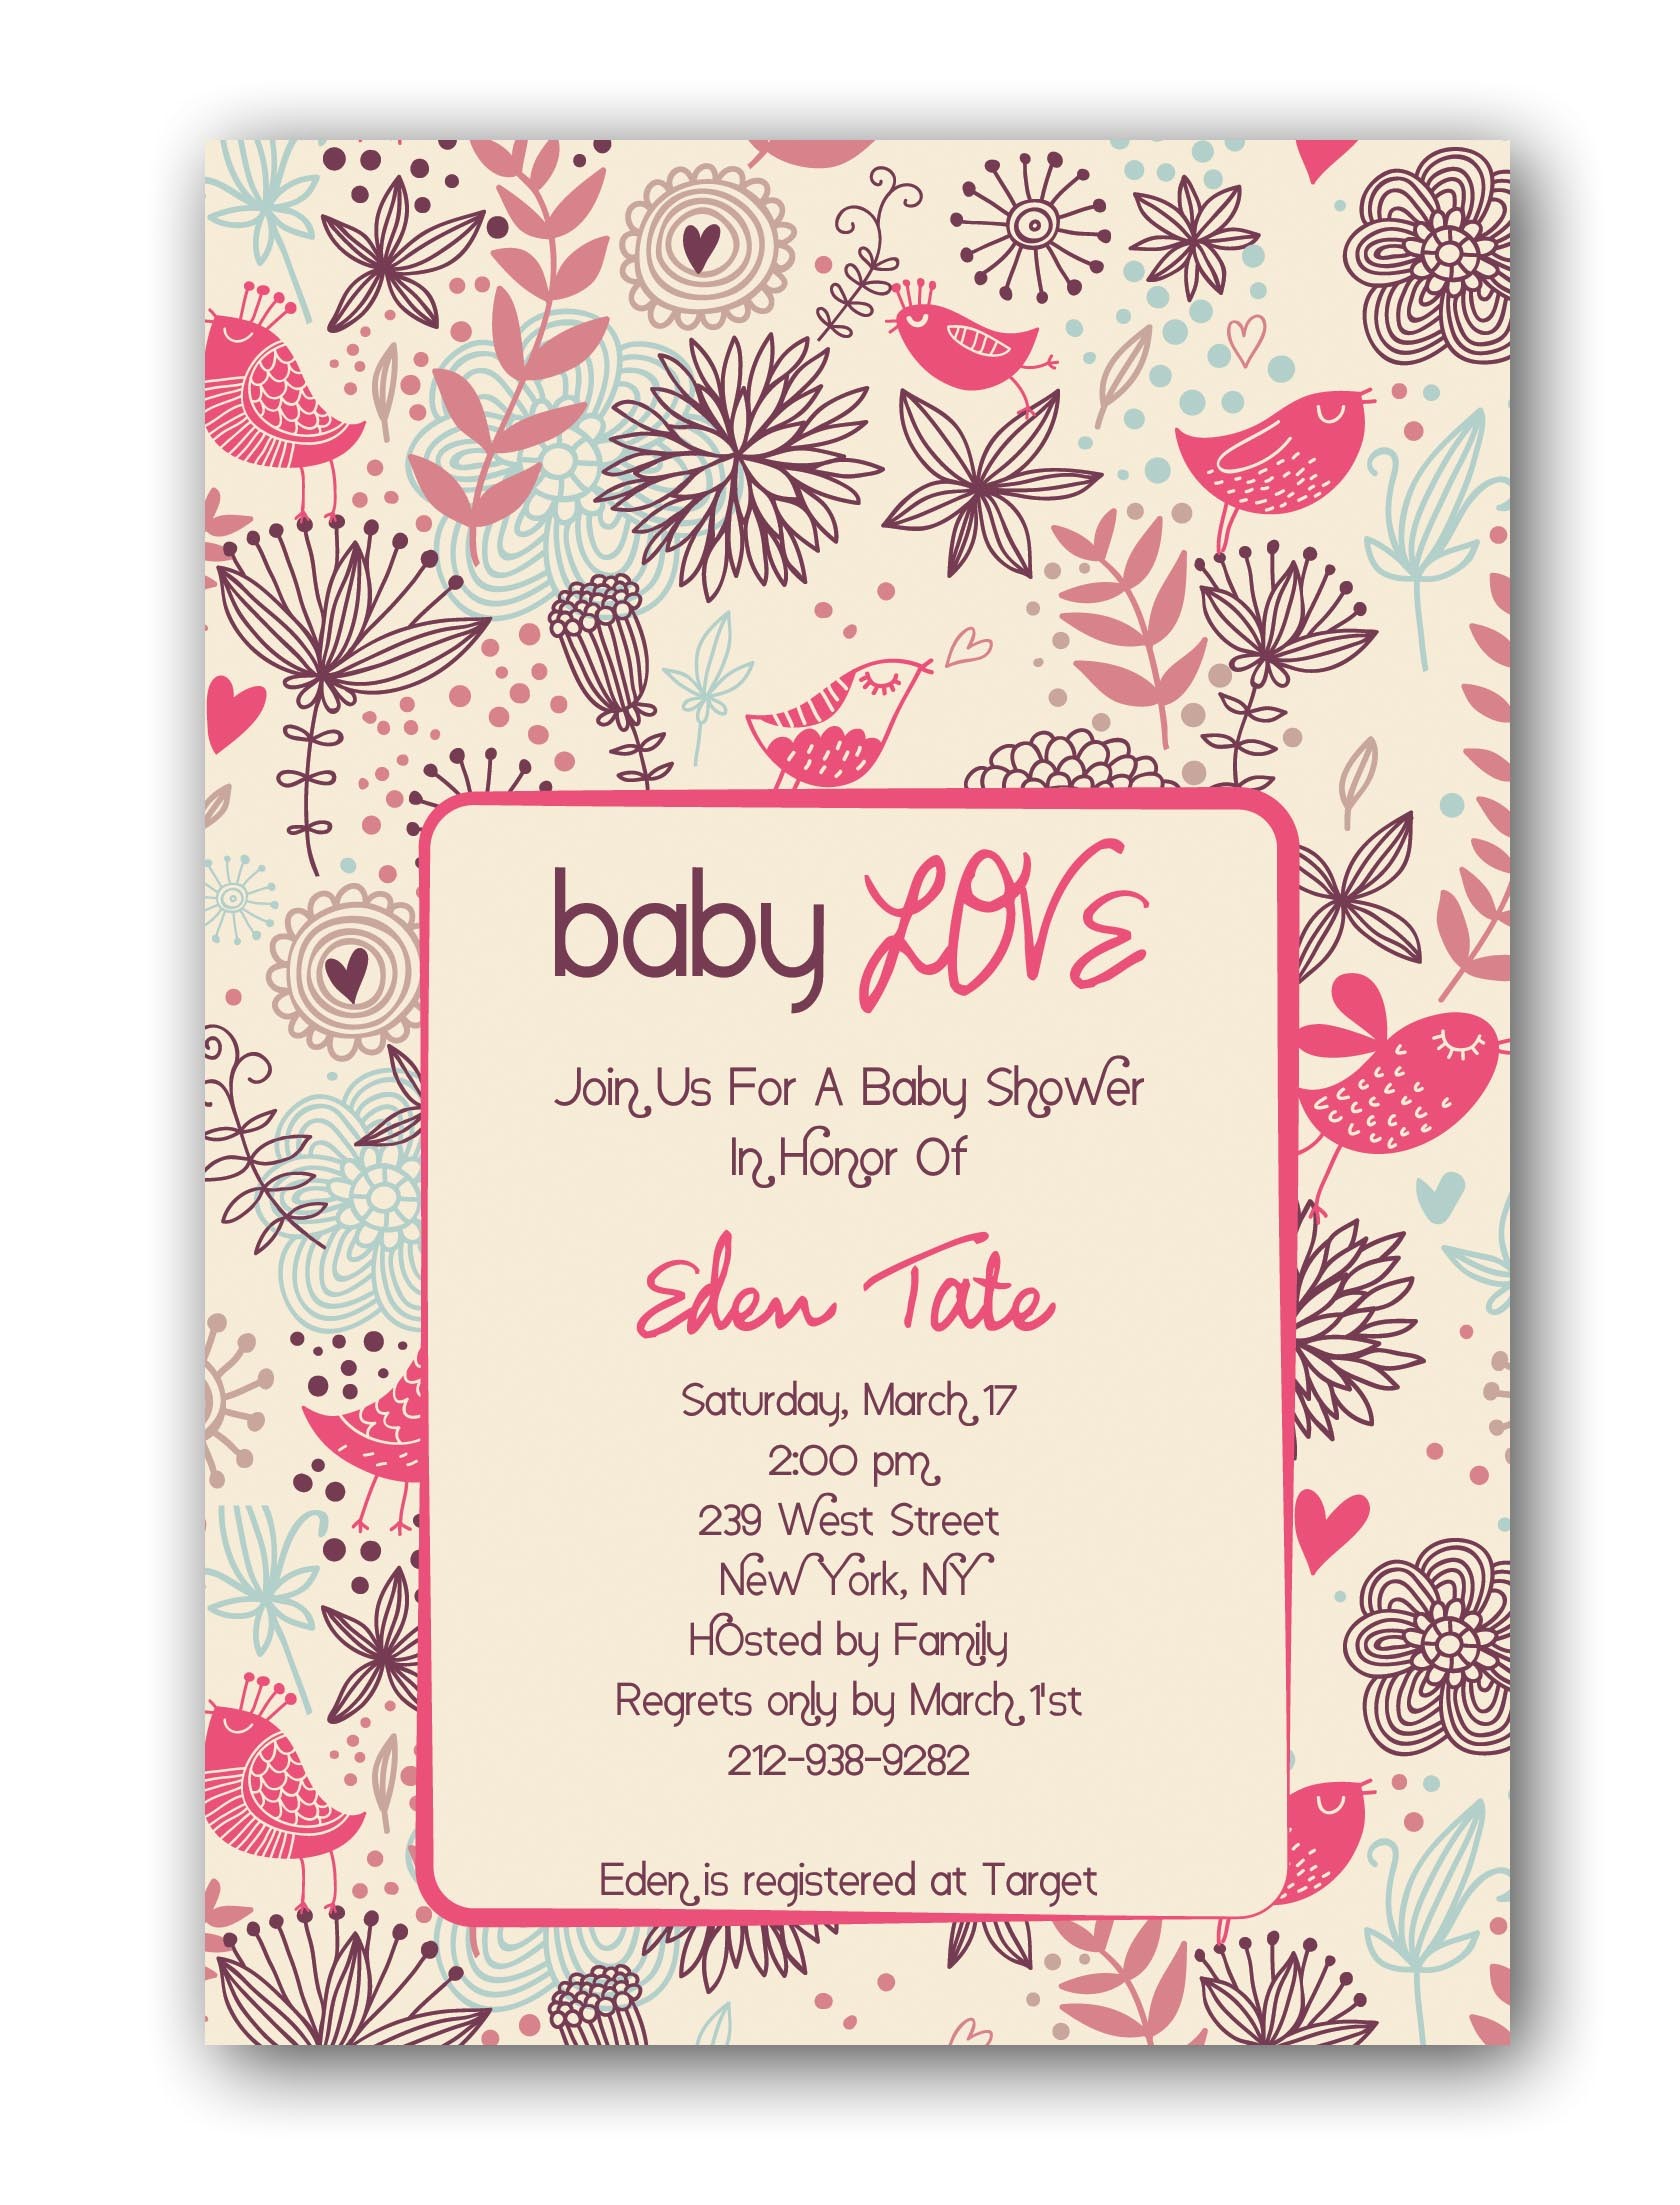 Cheap Baby Shower Invitations Online Cheap Baby Shower Invitations